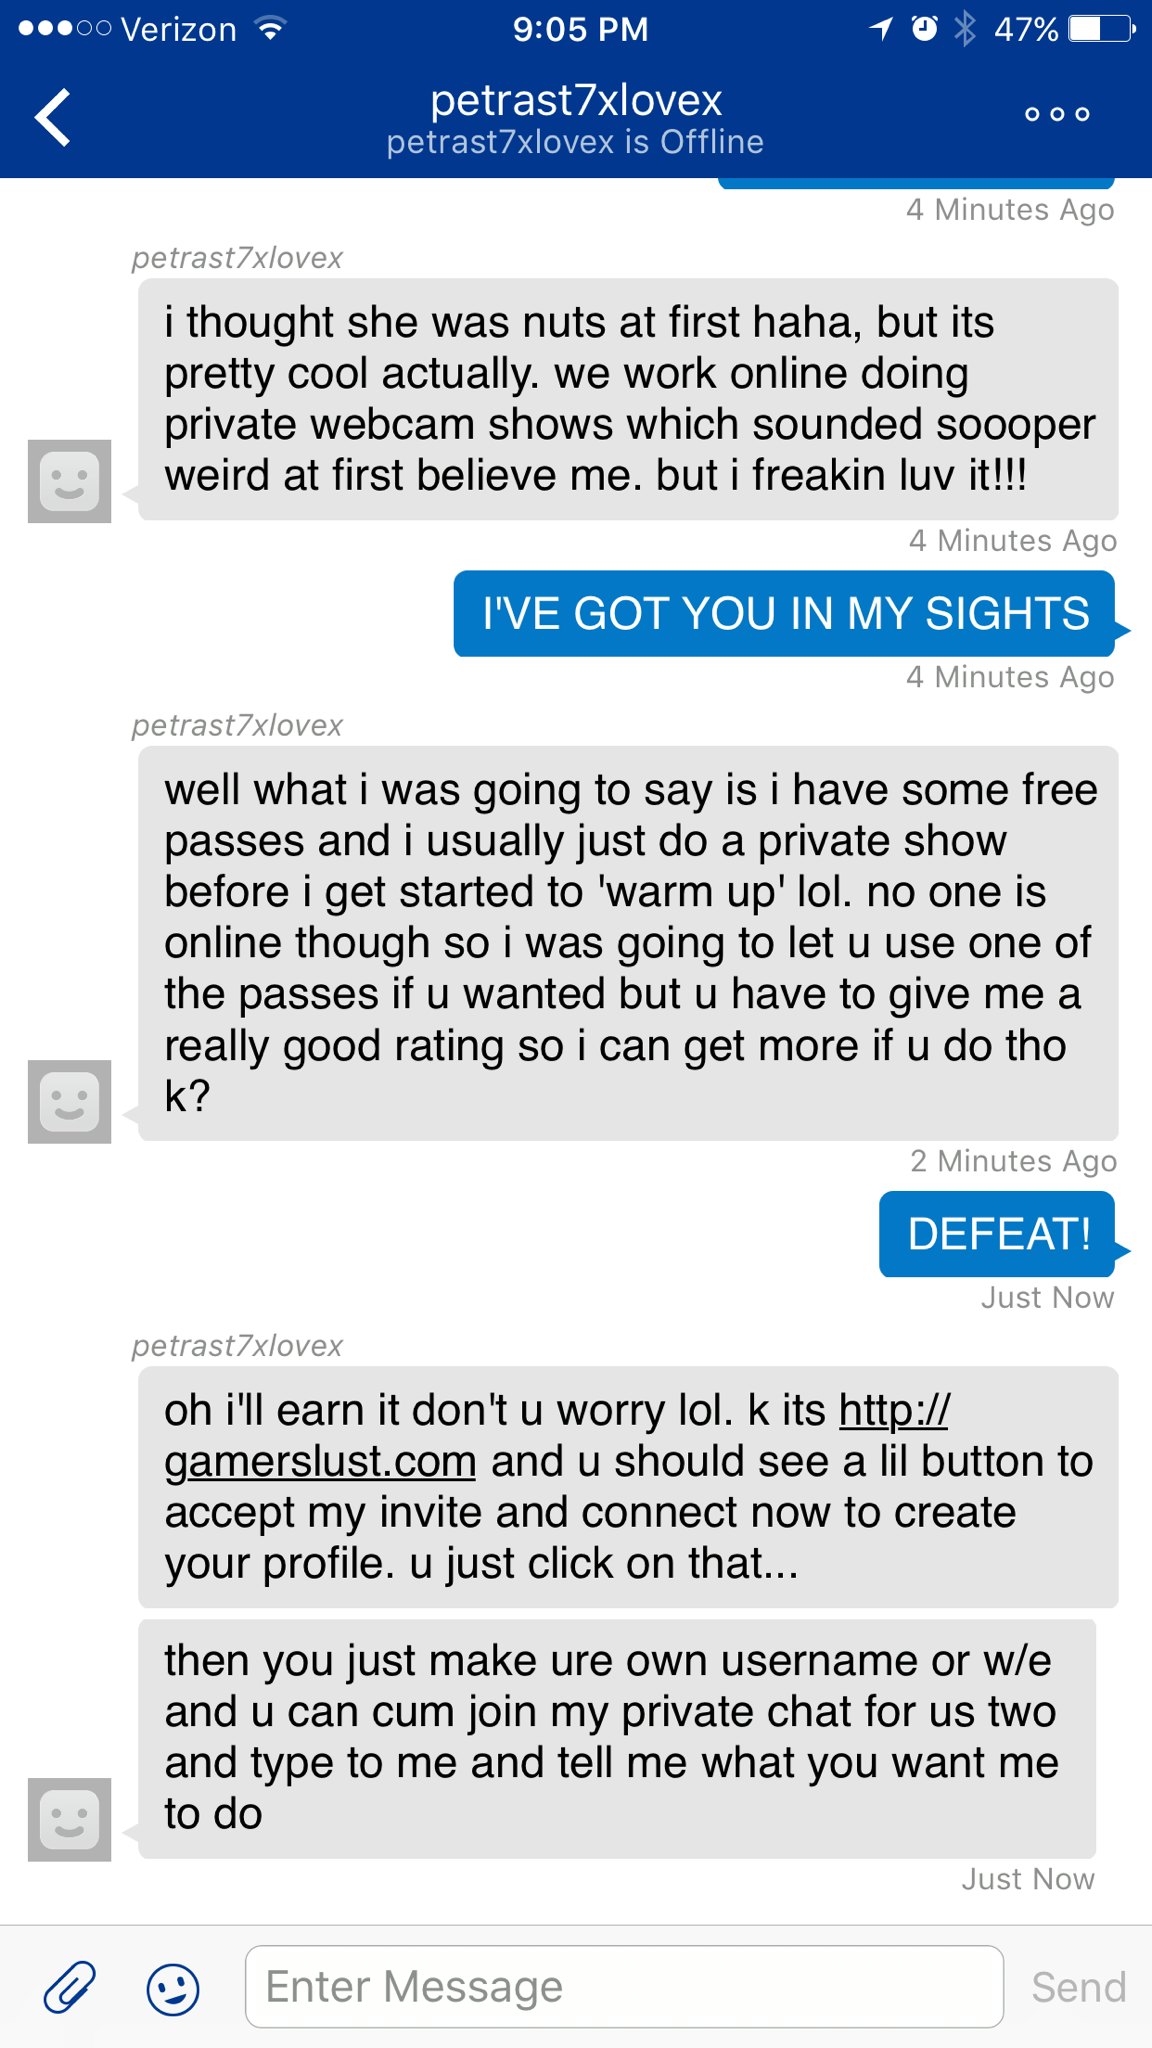 PlayStation Network and Xbox Live have a porn bot spam problem